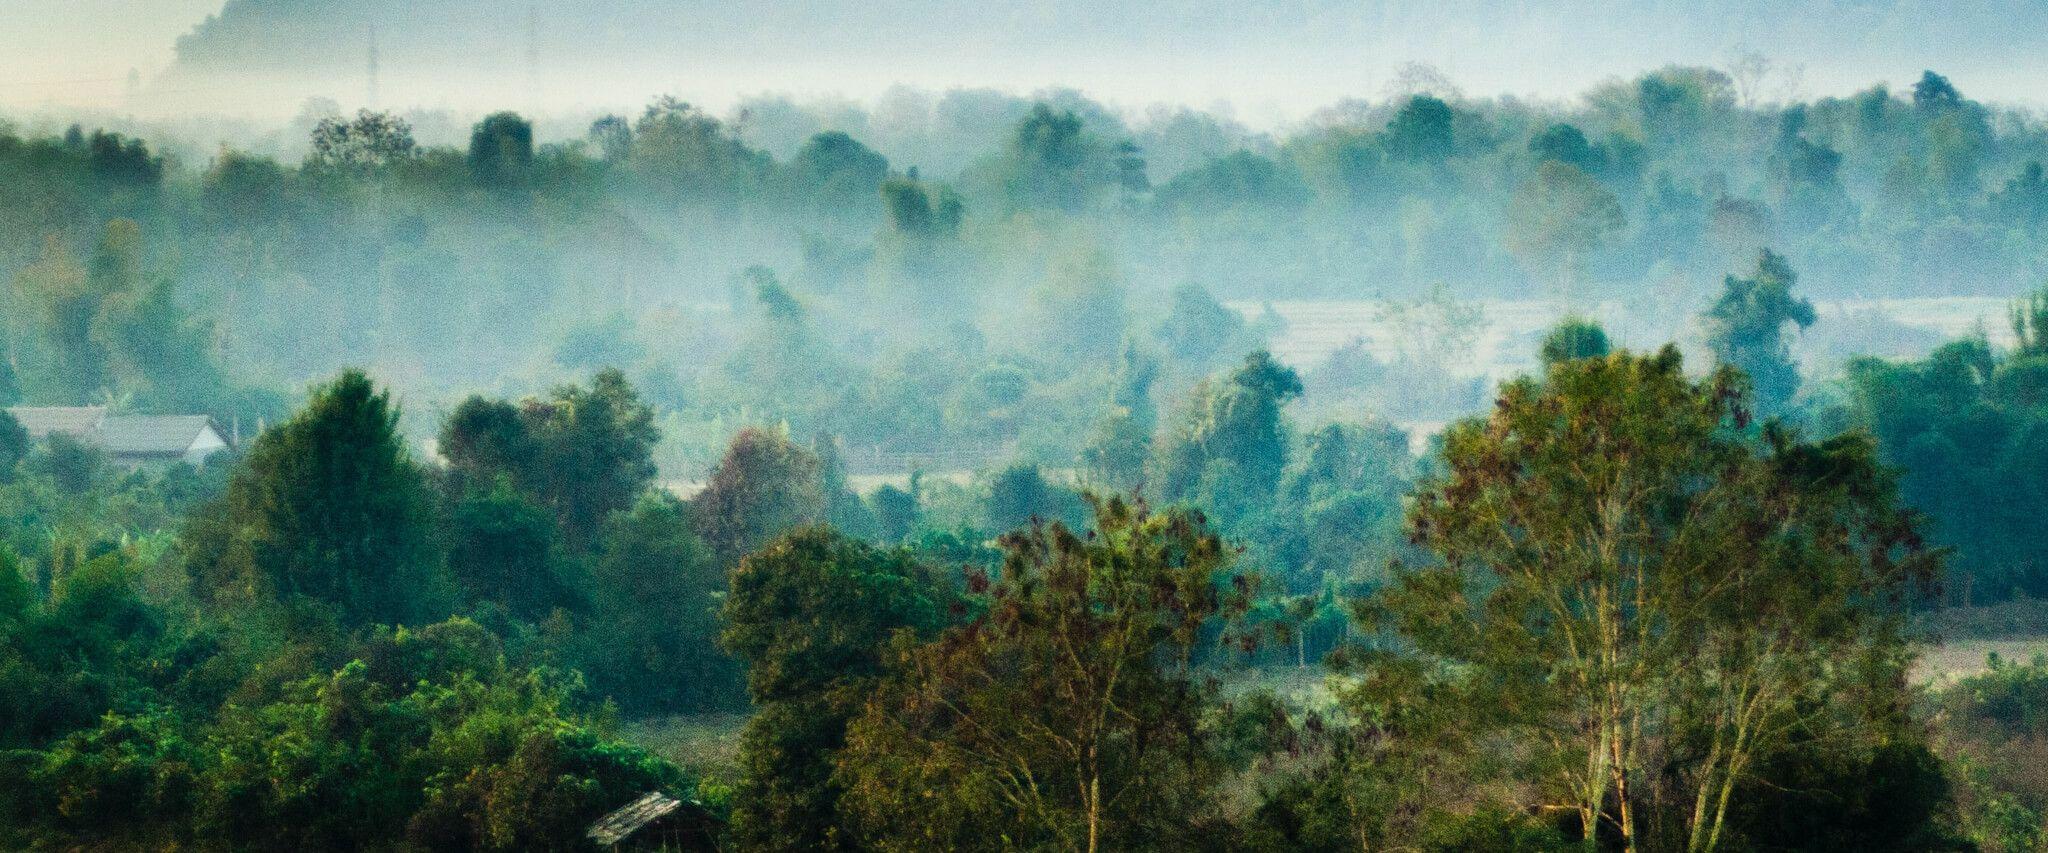 Laos PDR faces widespread deforestation and habitat loss, a situation that has long-term effects on biodiversity and land degradation. 
Photo: Unsplash